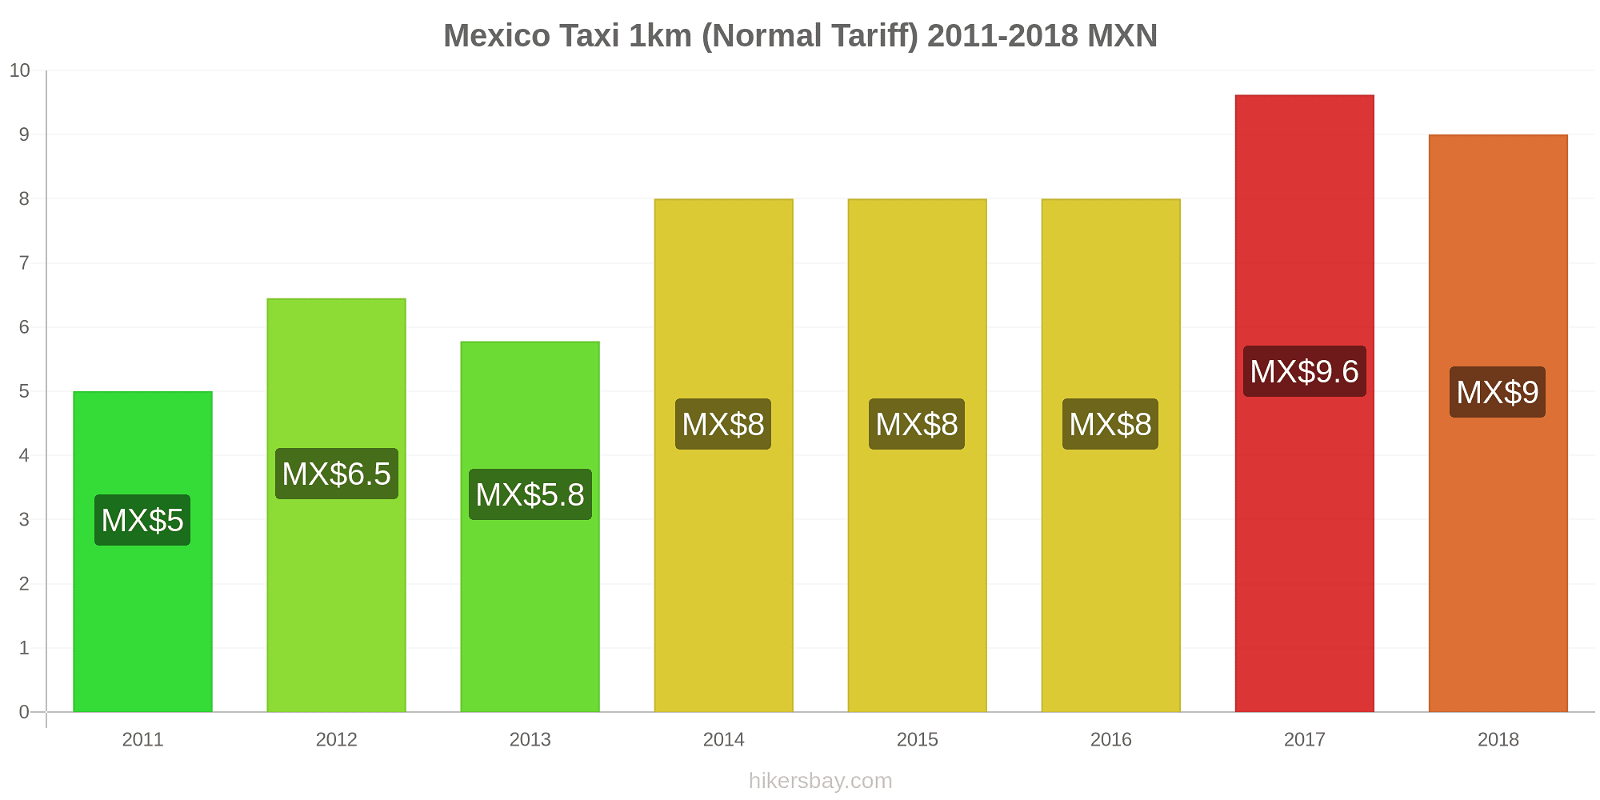 Mexico price changes Taxi 1km (Normal Tariff) hikersbay.com